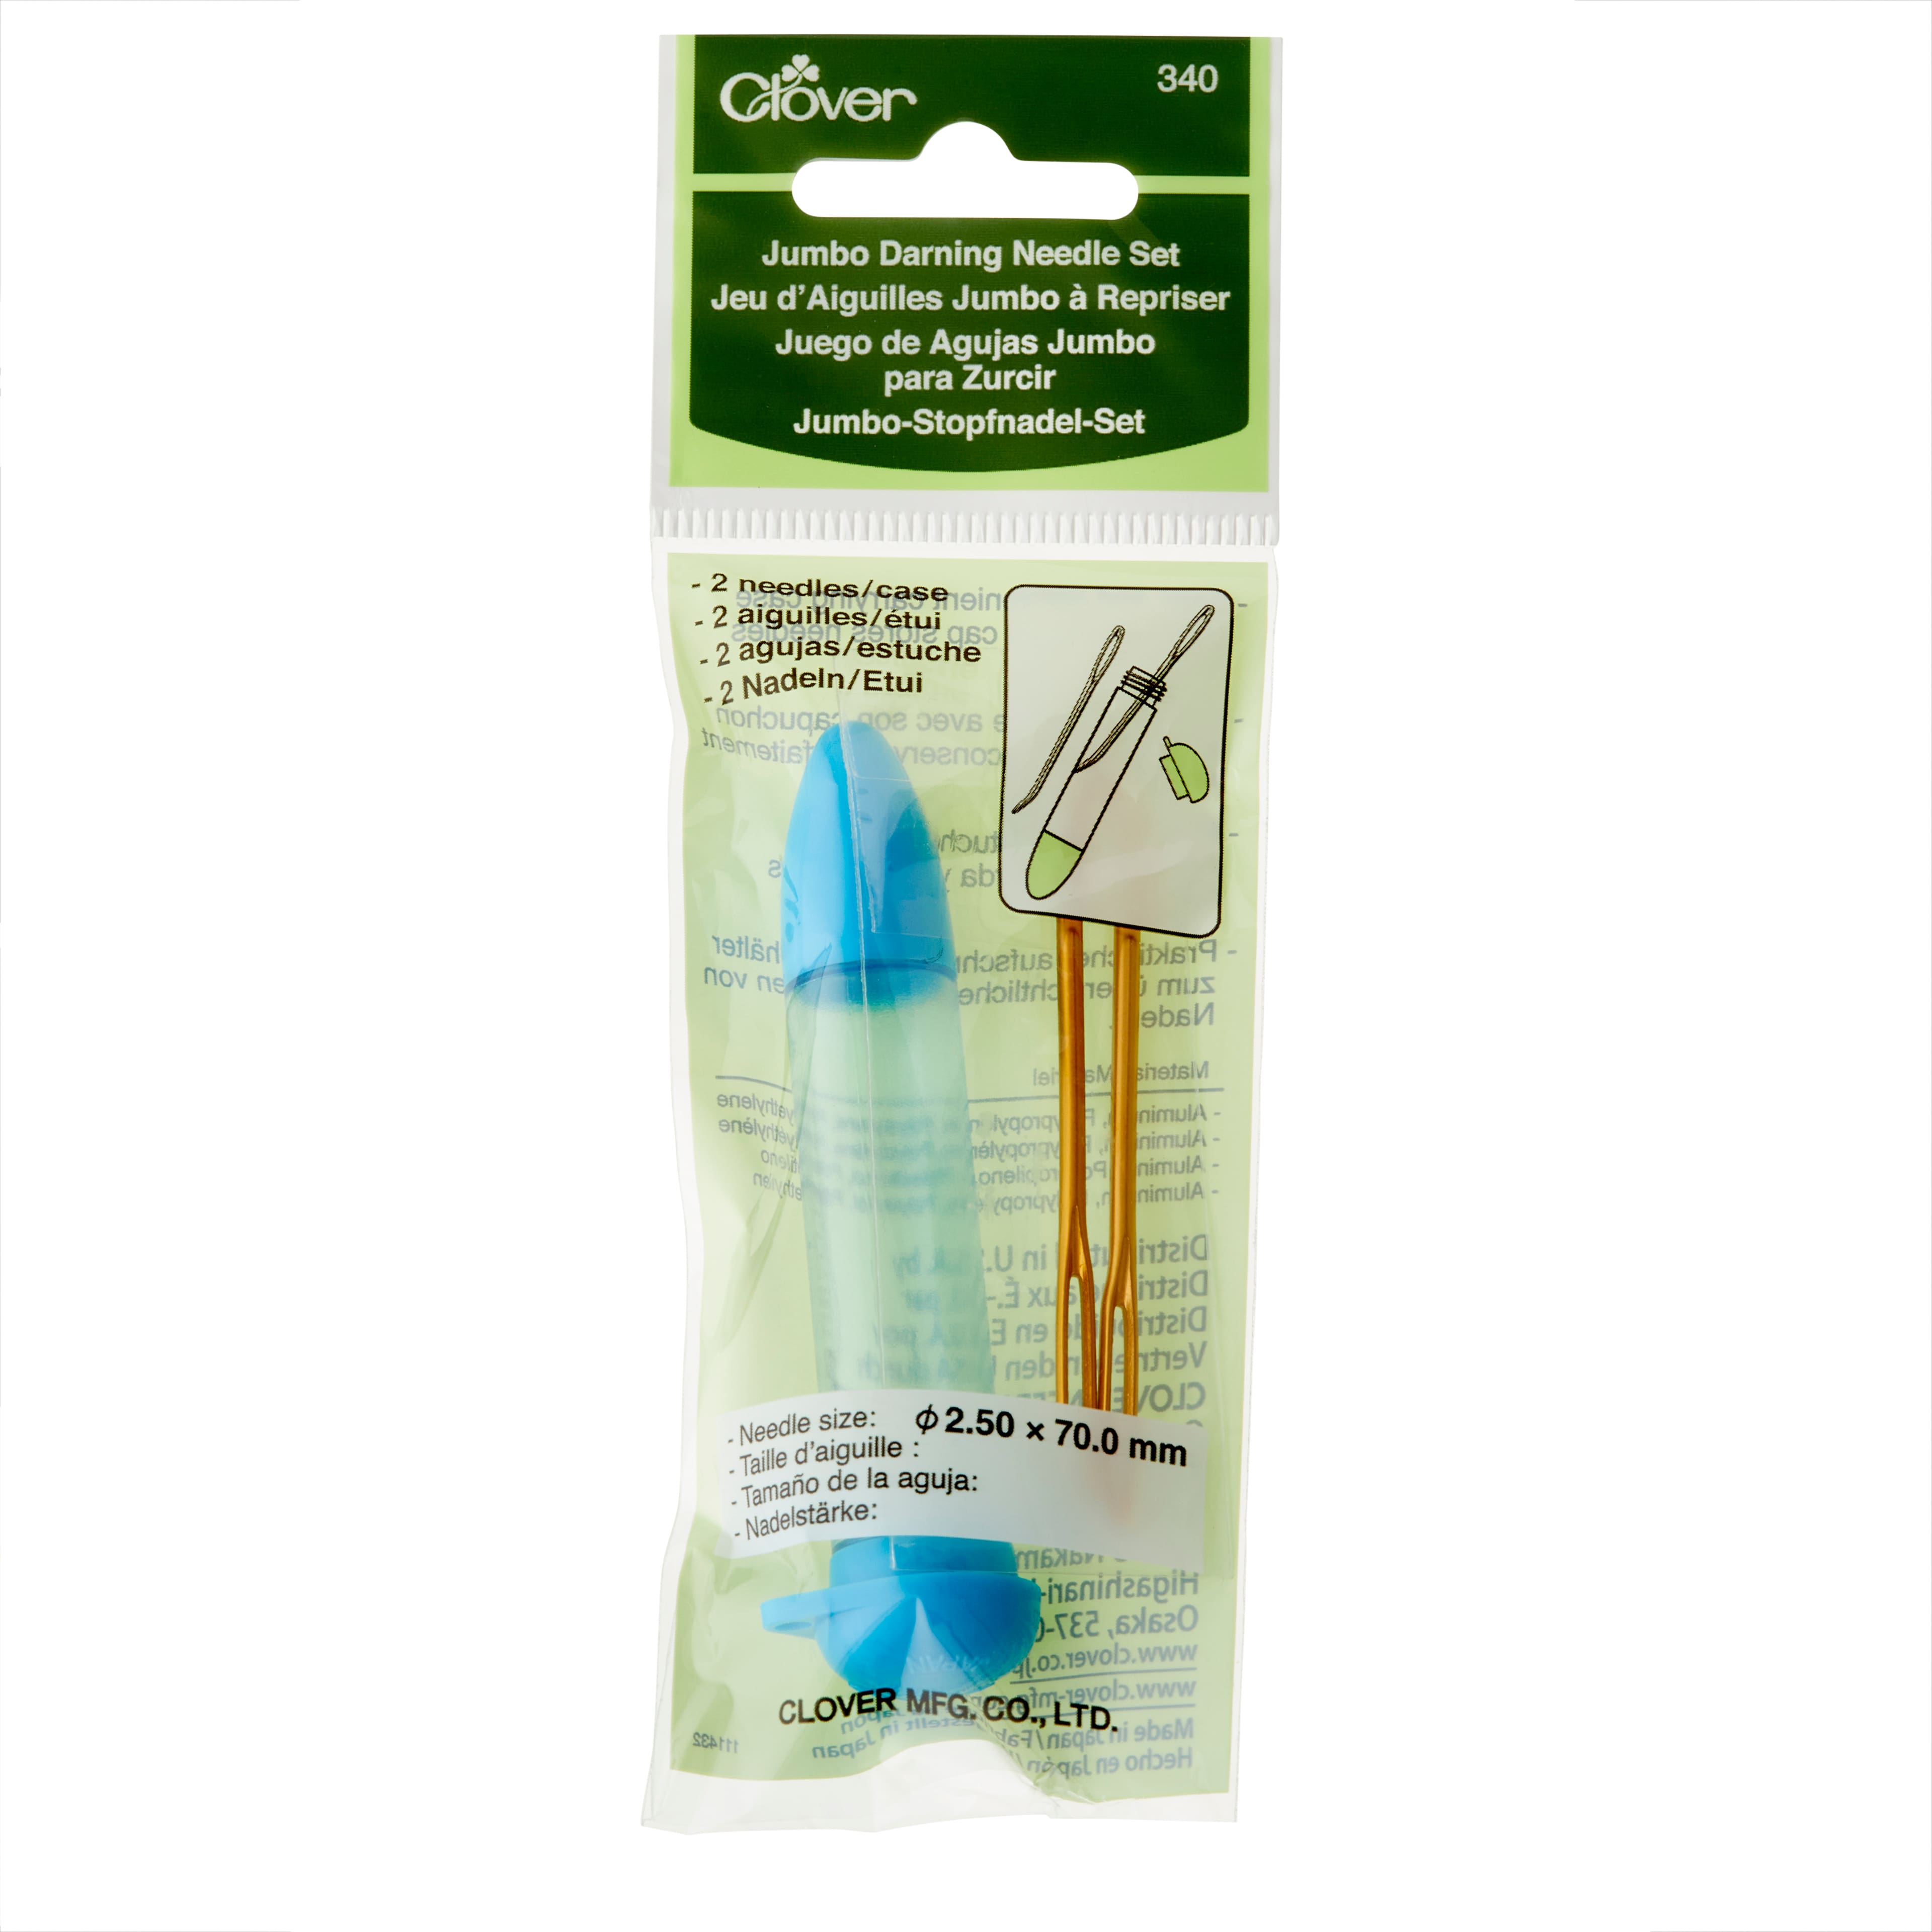 Wool Darning needles pack of 4 - size 10-12 for darning/kniting mending &  repair